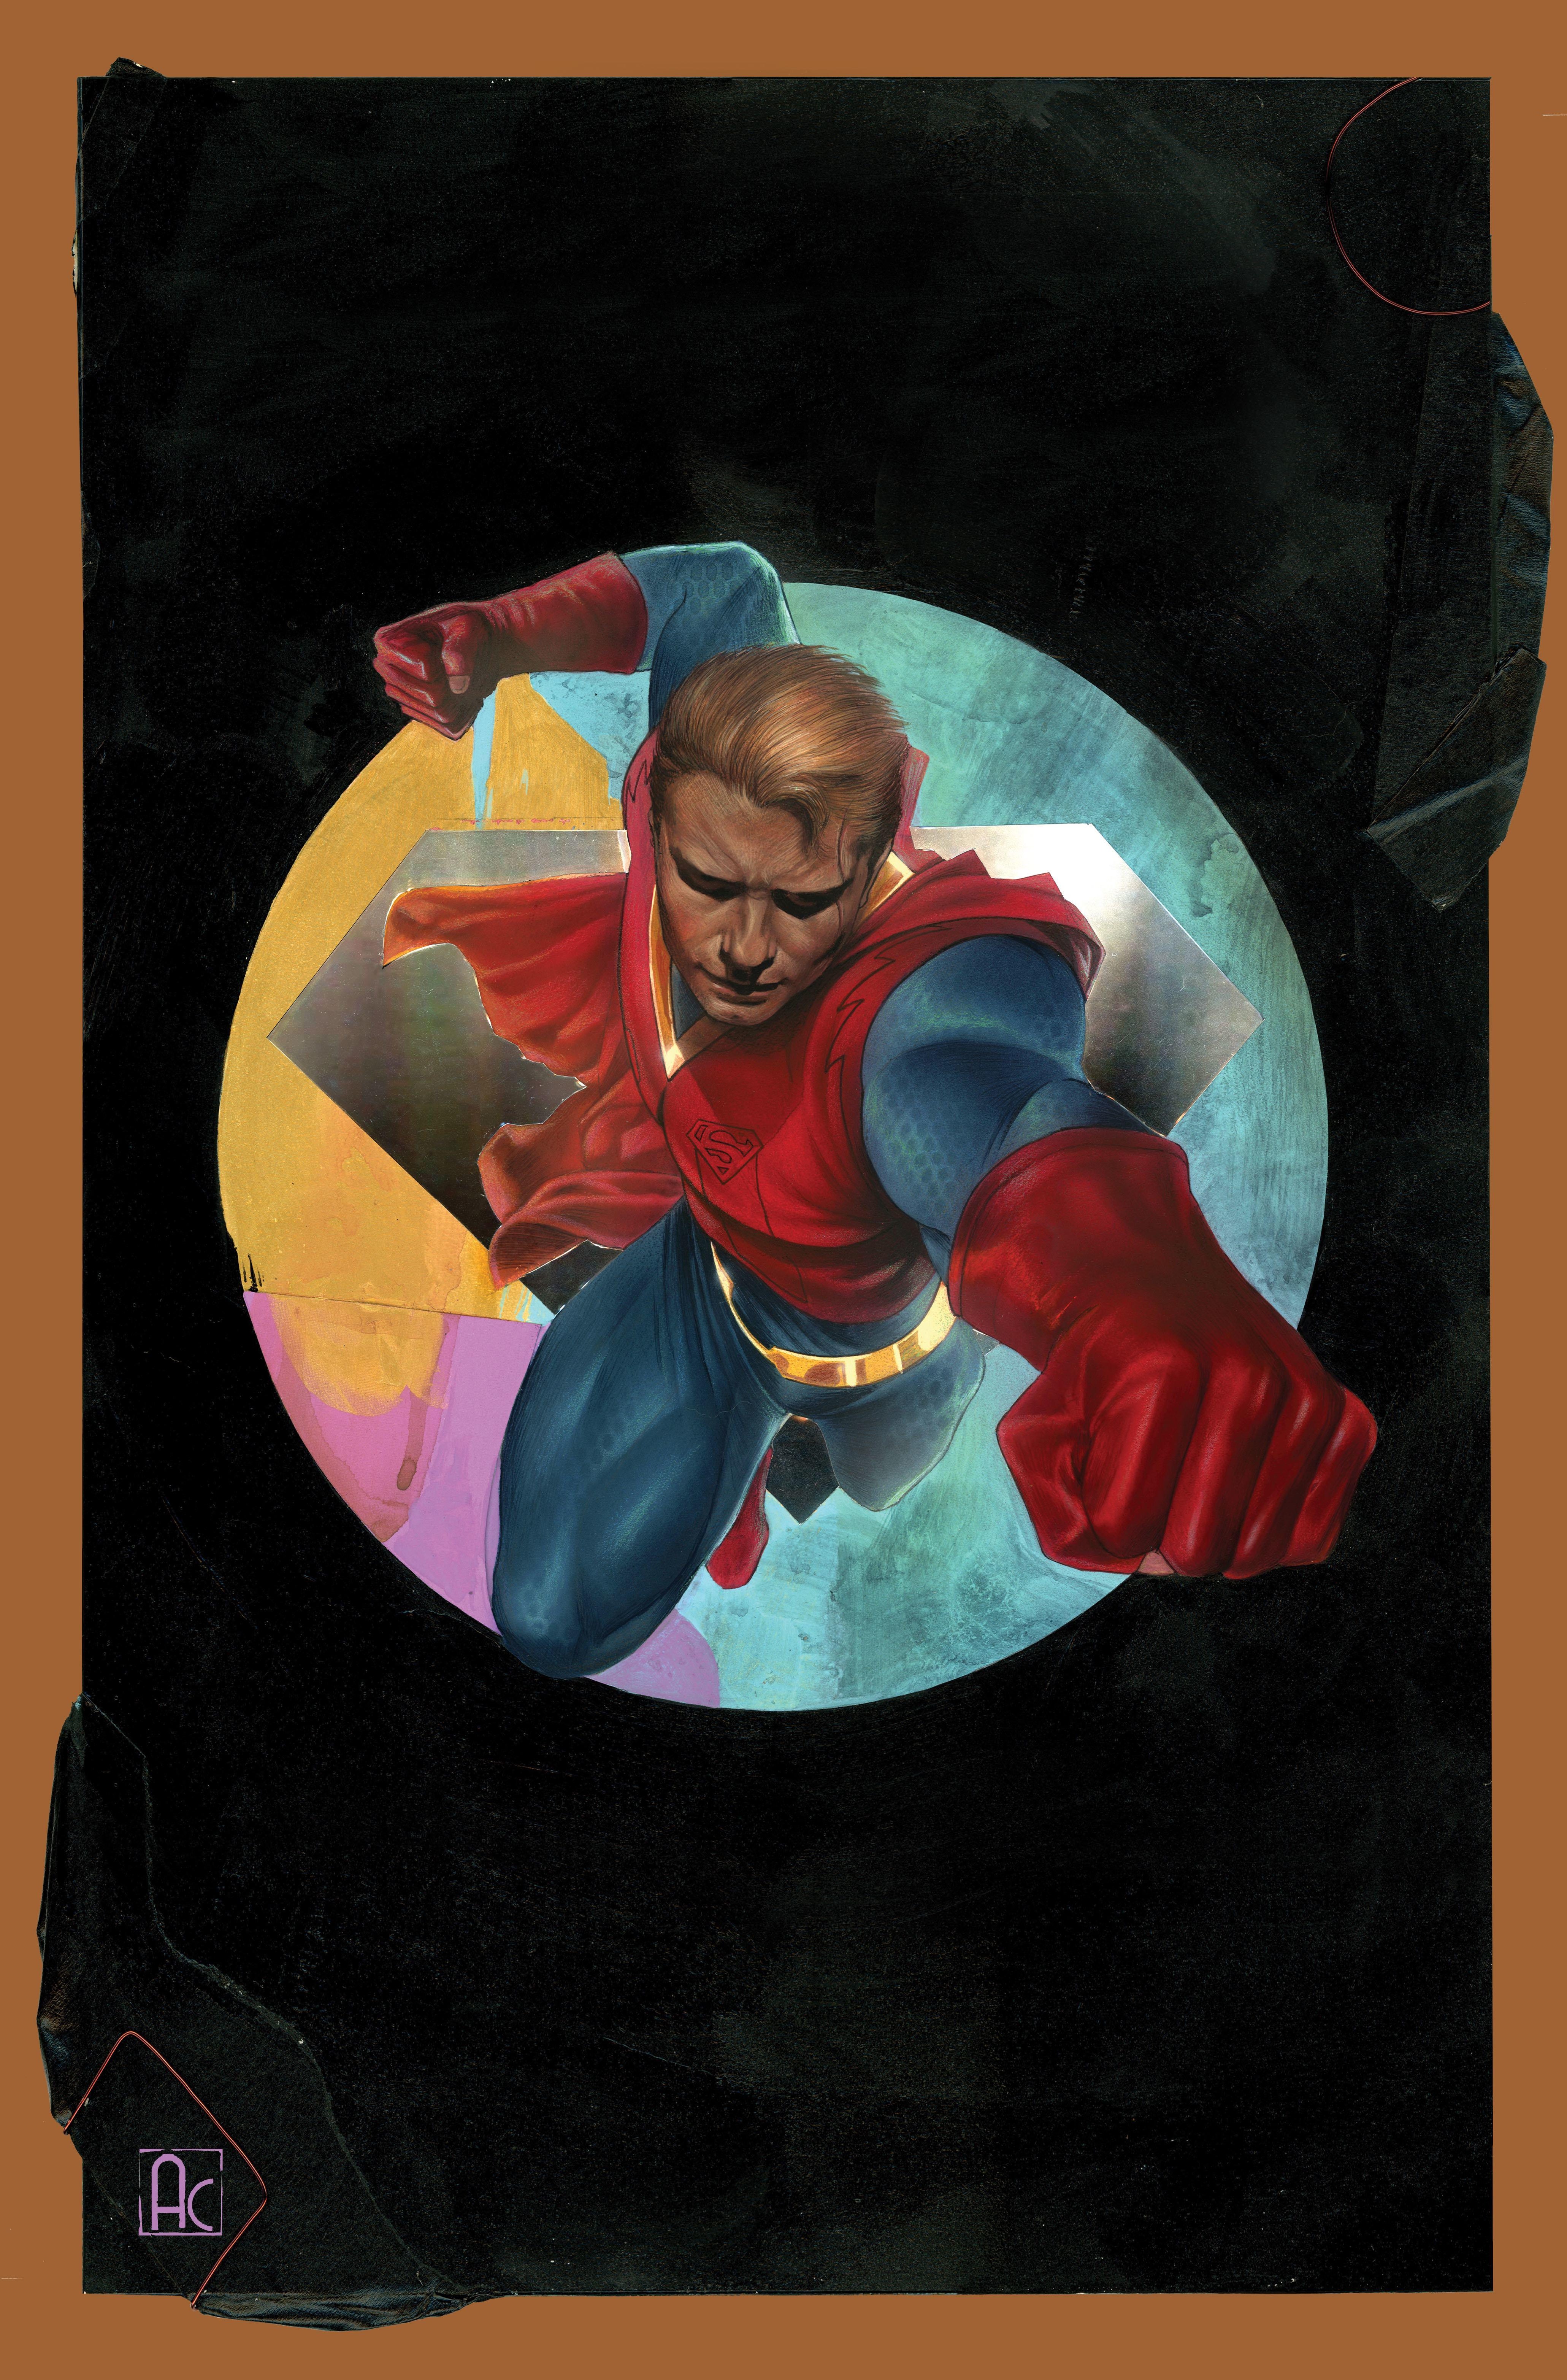 tales-from-earth-6-a-celebration-of-stan-lee-1-superman-open-to-order-variant-colon.jpg